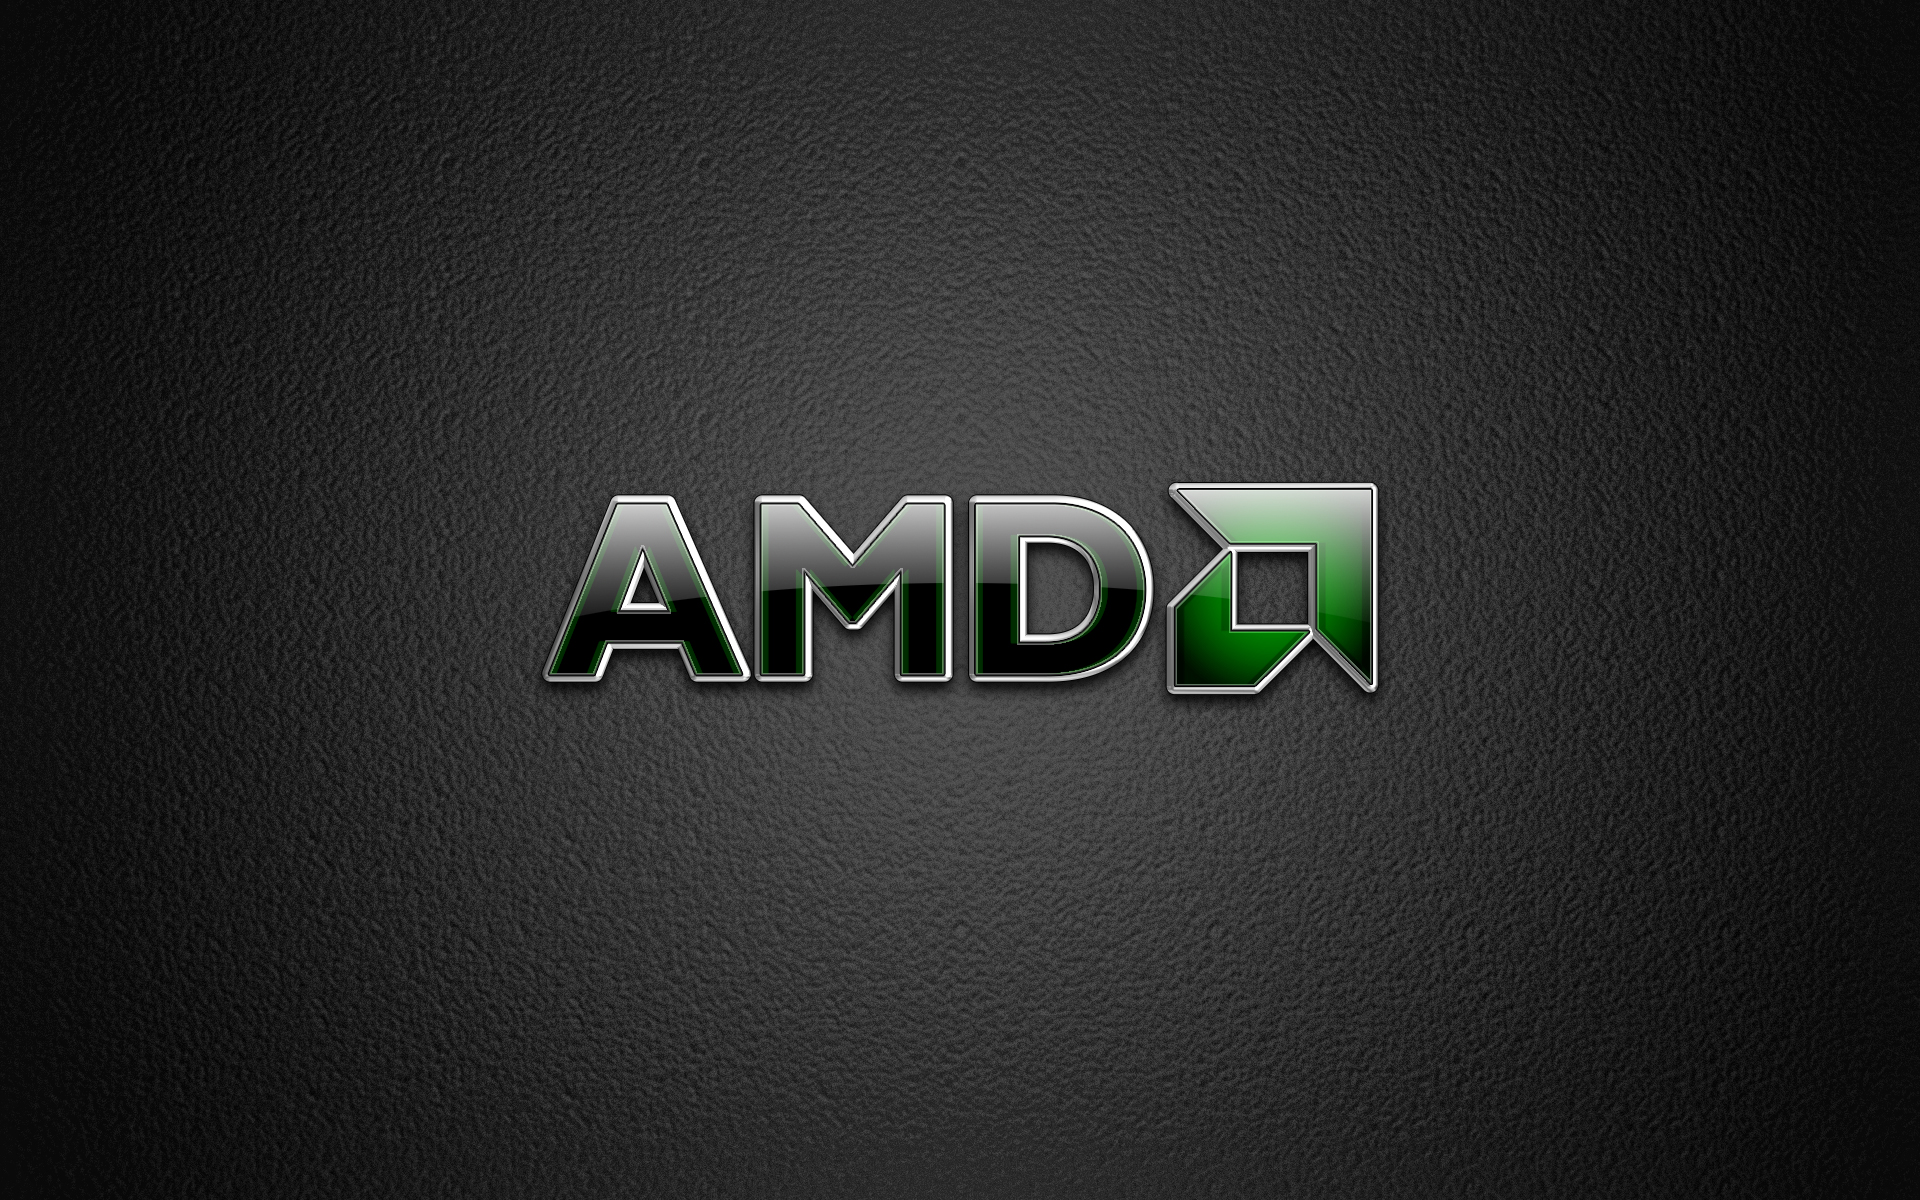 Free Download Awesome AMD Wallpaper For Android 2093 Wallpaper Screen [1920x1200] For Your Desktop, Mobile & Tablet. Explore AMD Logo Wallpaper. Amd Wallpaper 1920X Double Monitor Wallpaper, Multi Monitor Wallpaper